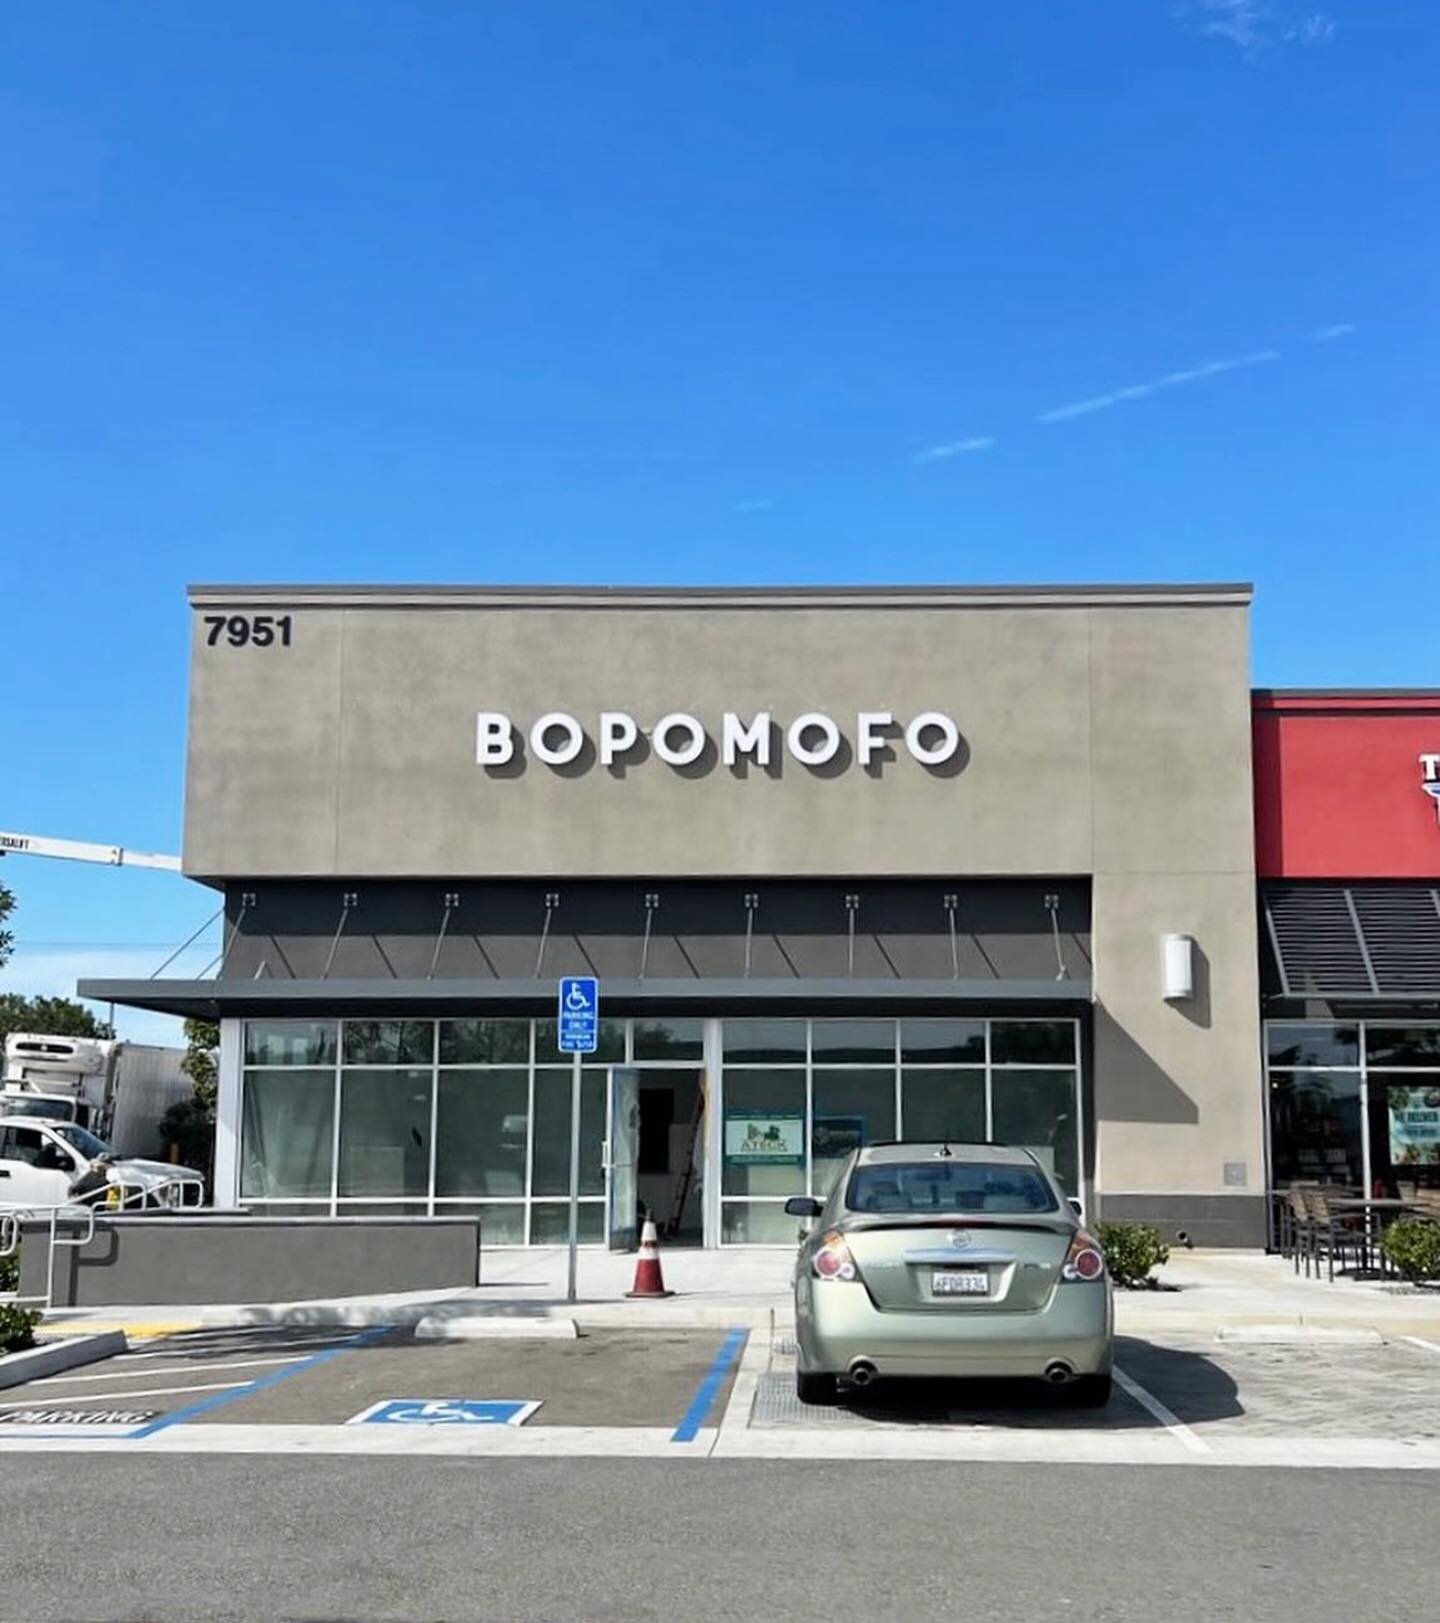 If you haven&rsquo;t heard from the awesome @wongfuphil himself, BOPOMOFO🧋is opening their third location right here in Convoy! Opening date sure feels a lot closer now with the sign hung up! Have you found where they&rsquo;re located yet? 😜 Stay t